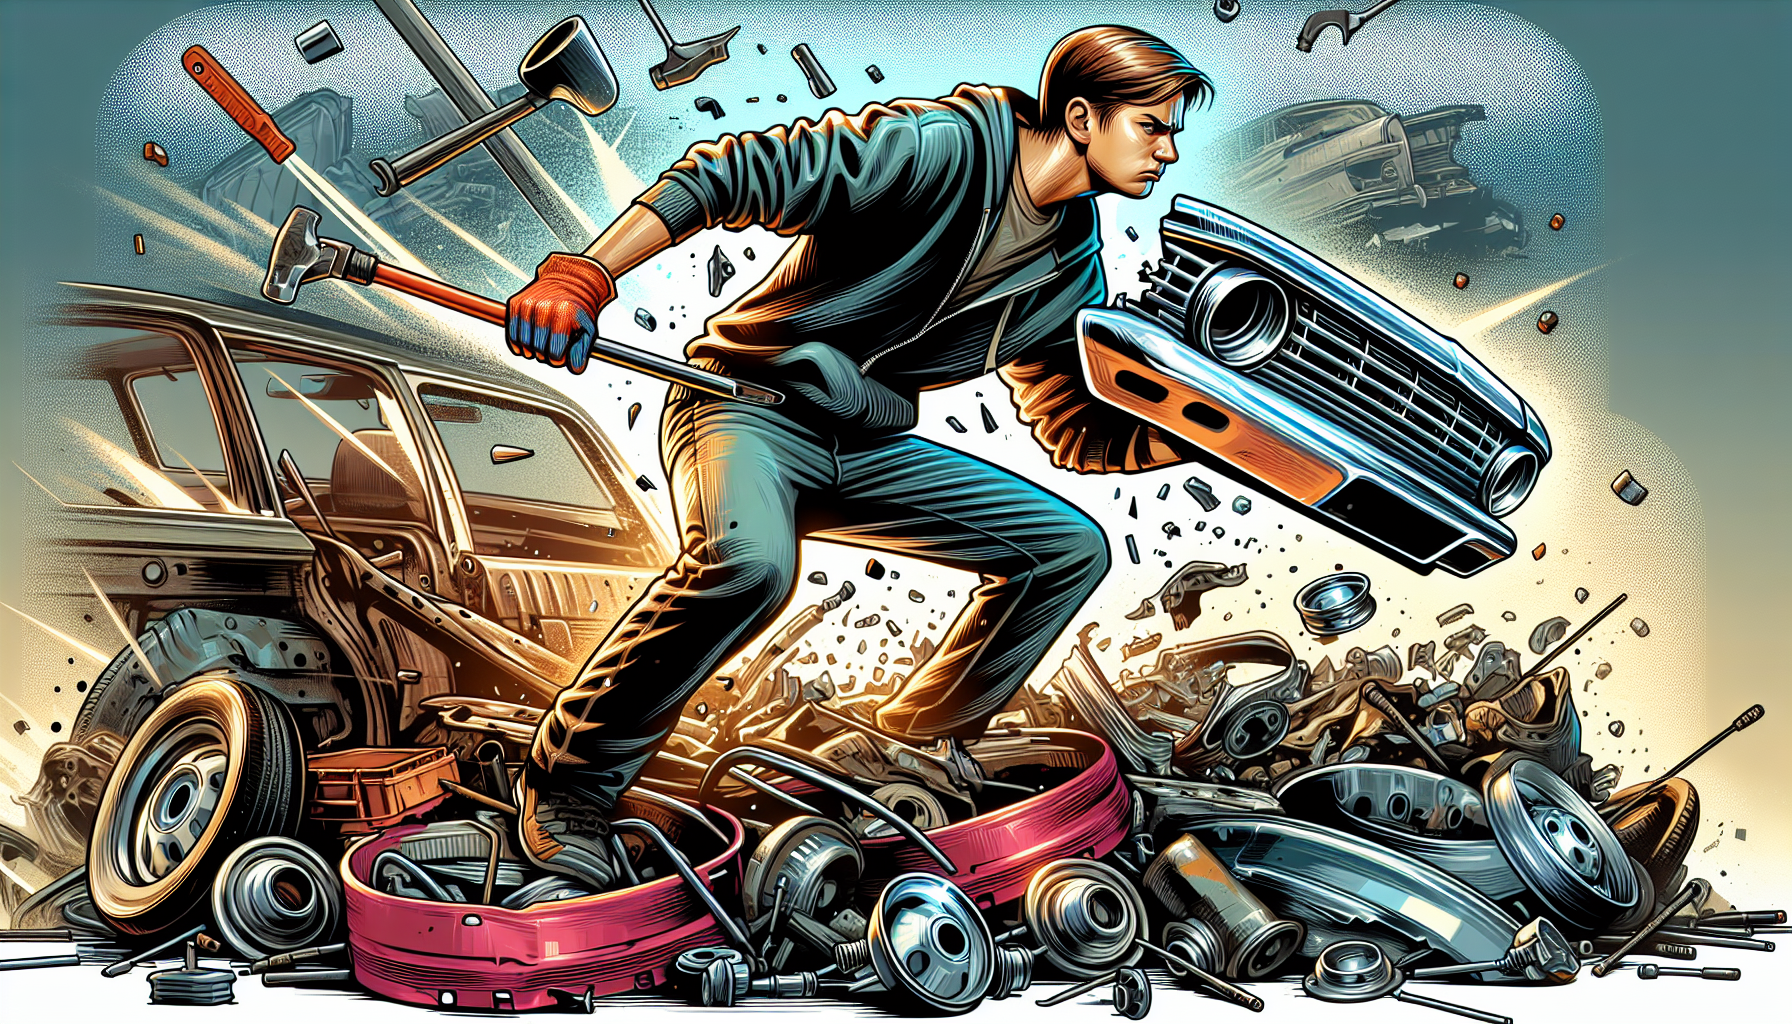 Illustration of a customer using tools to remove auto parts from a vehicle